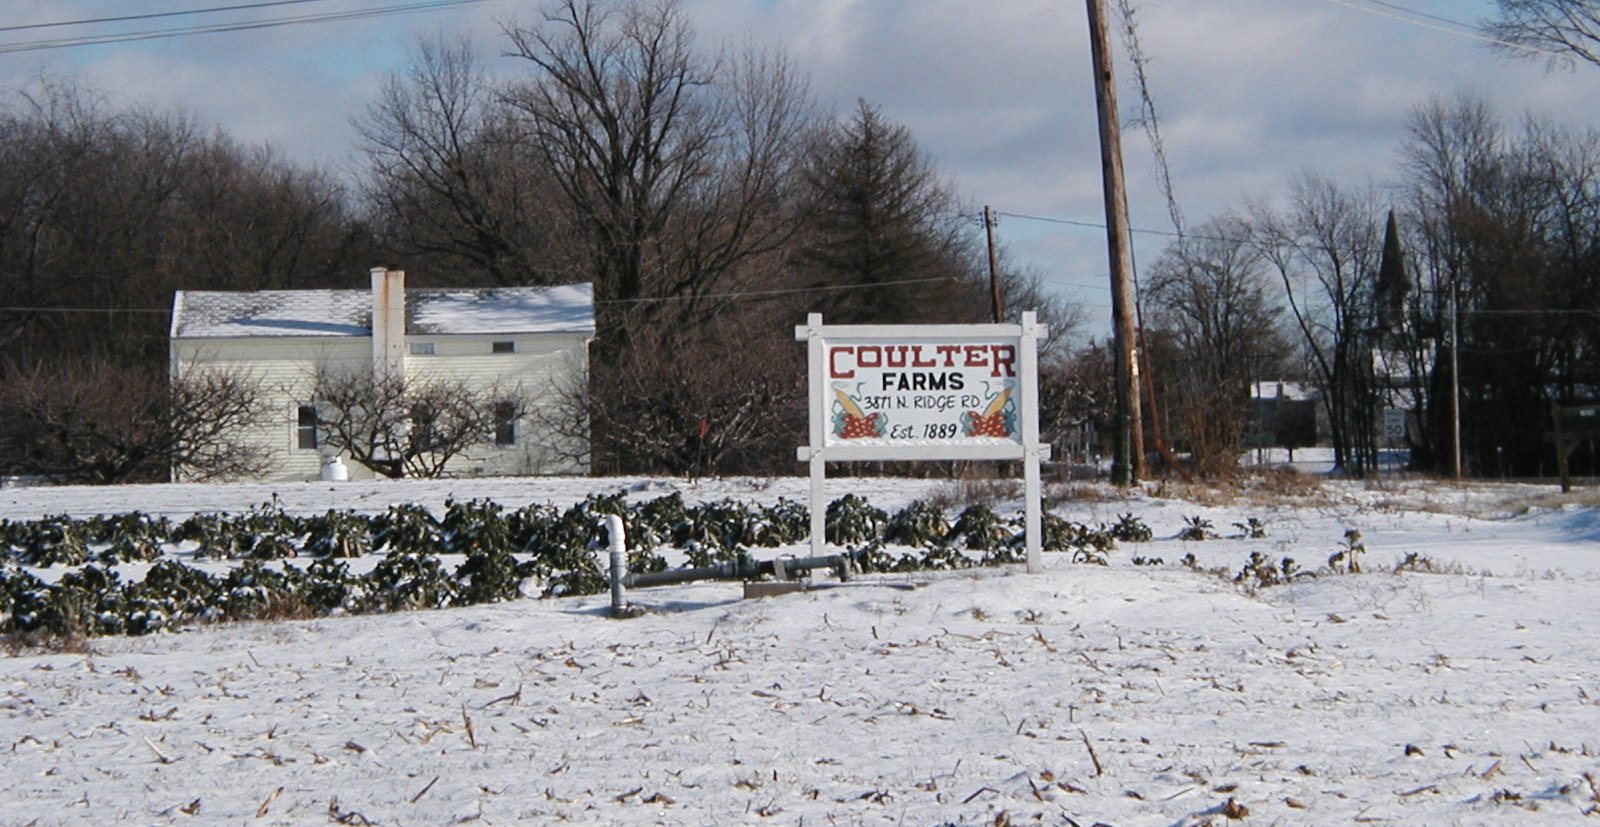 The Land Conservancy protects their largest property to date in Niagara County: The Coulter Farm